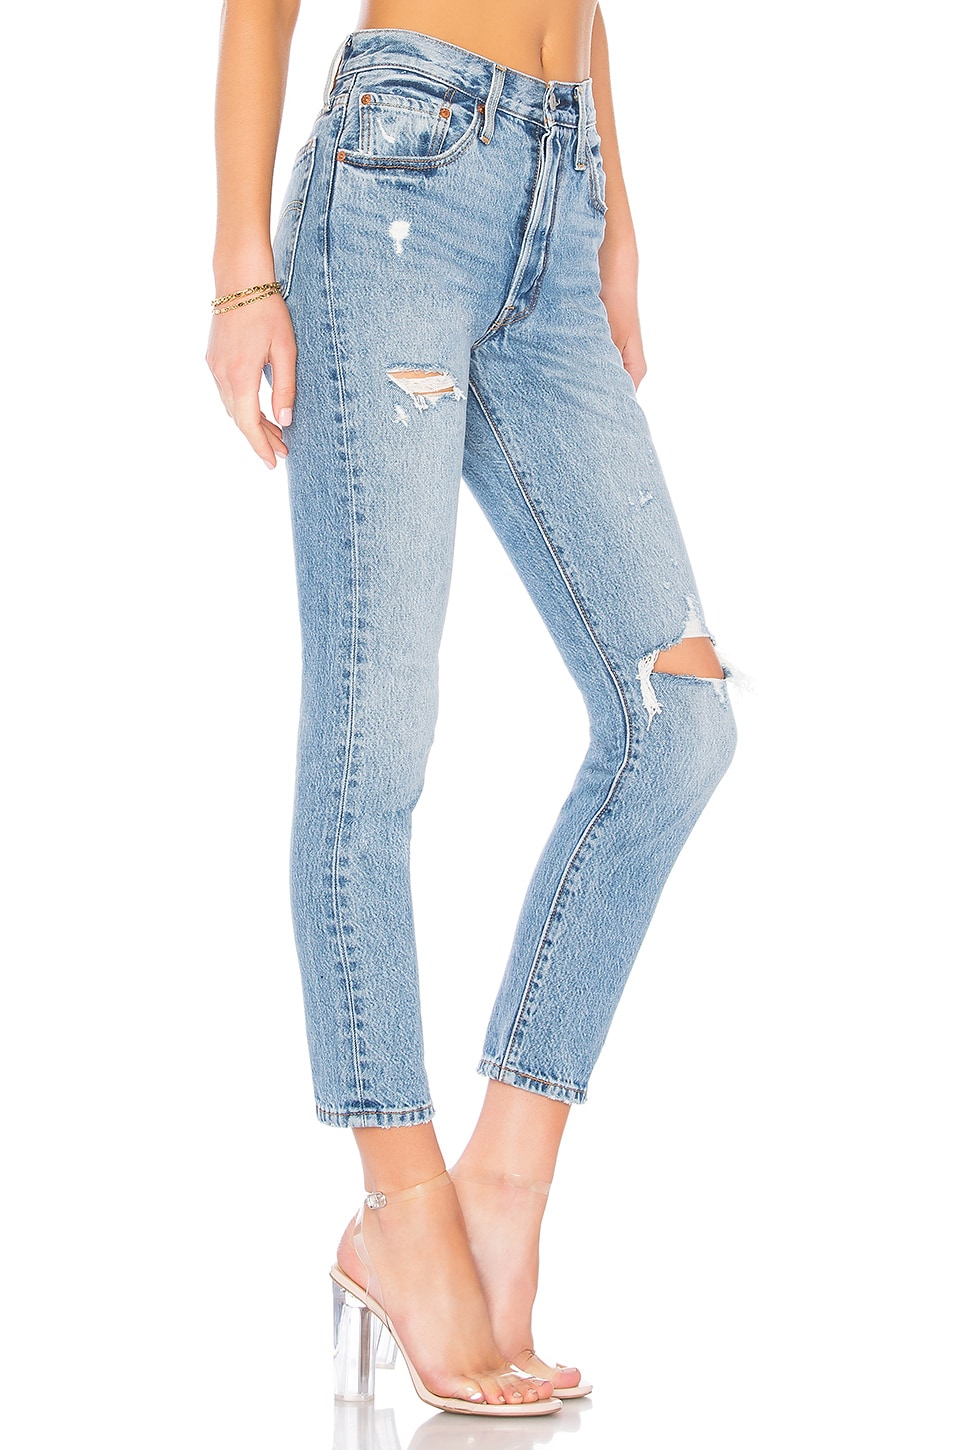 LEVI'S 501 Skinny in Can't Touch This | REVOLVE